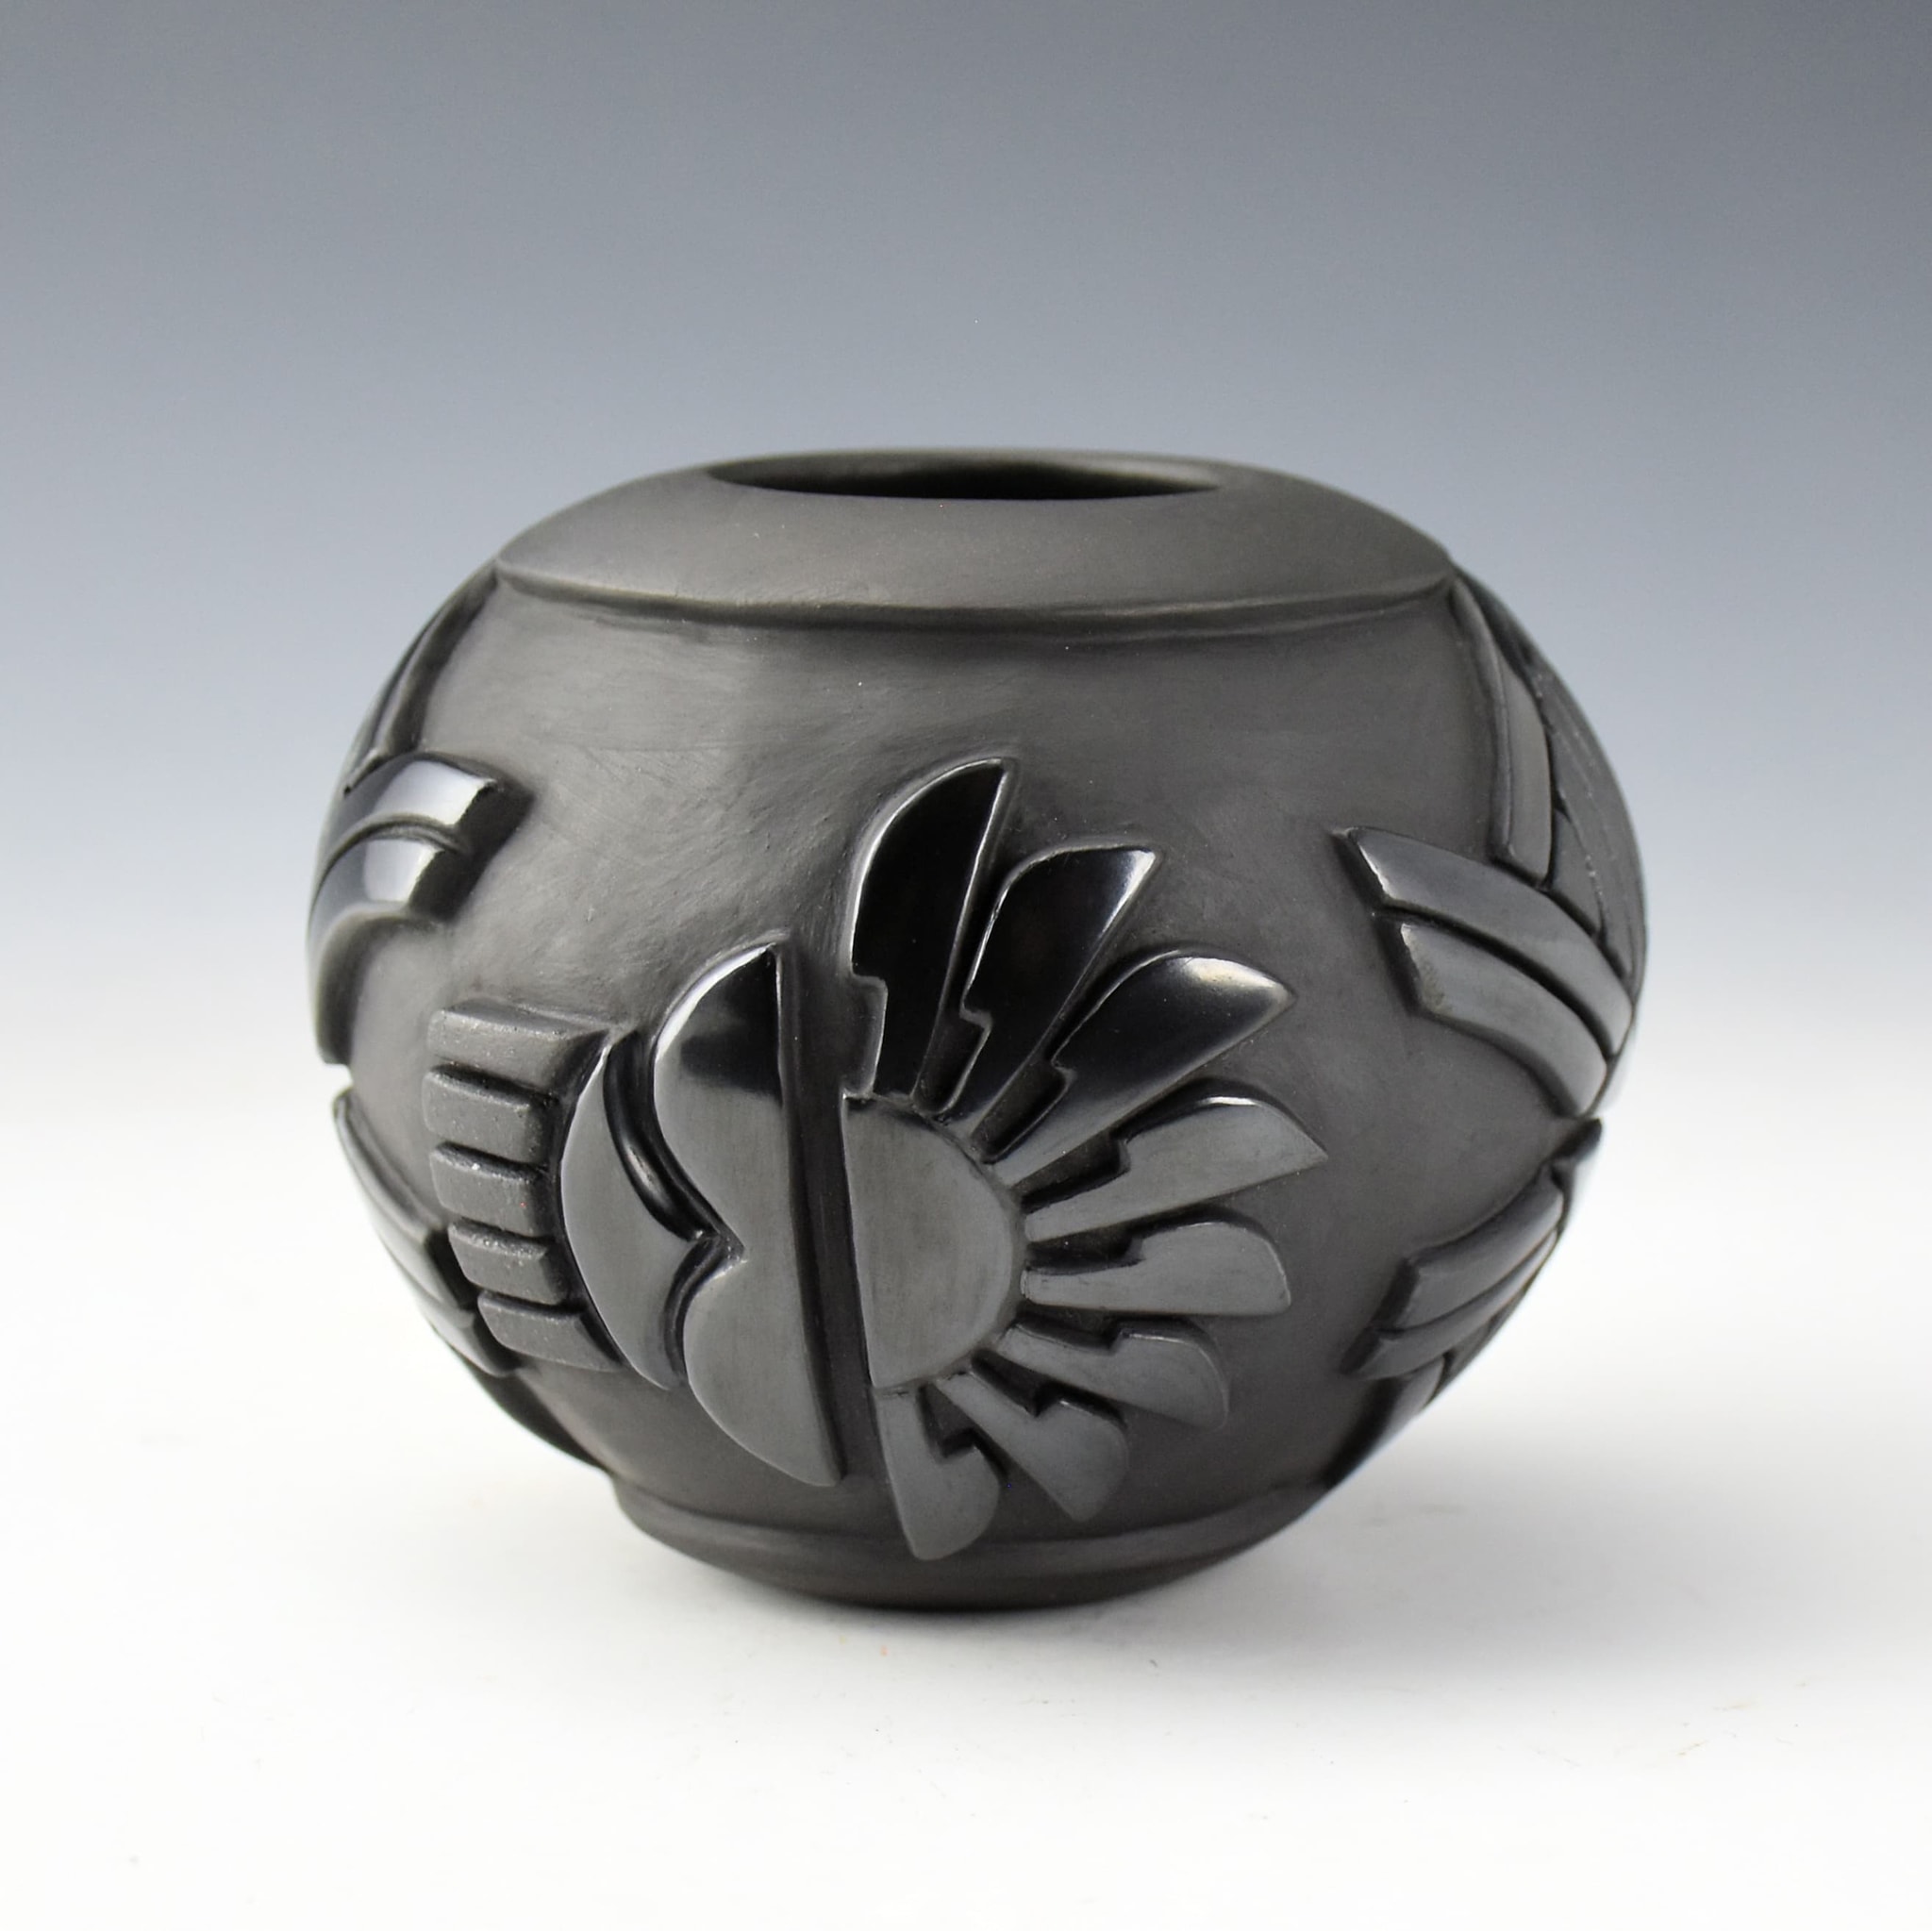 Joseph Youngblood Lugo, Carved Bowl, Craft of America